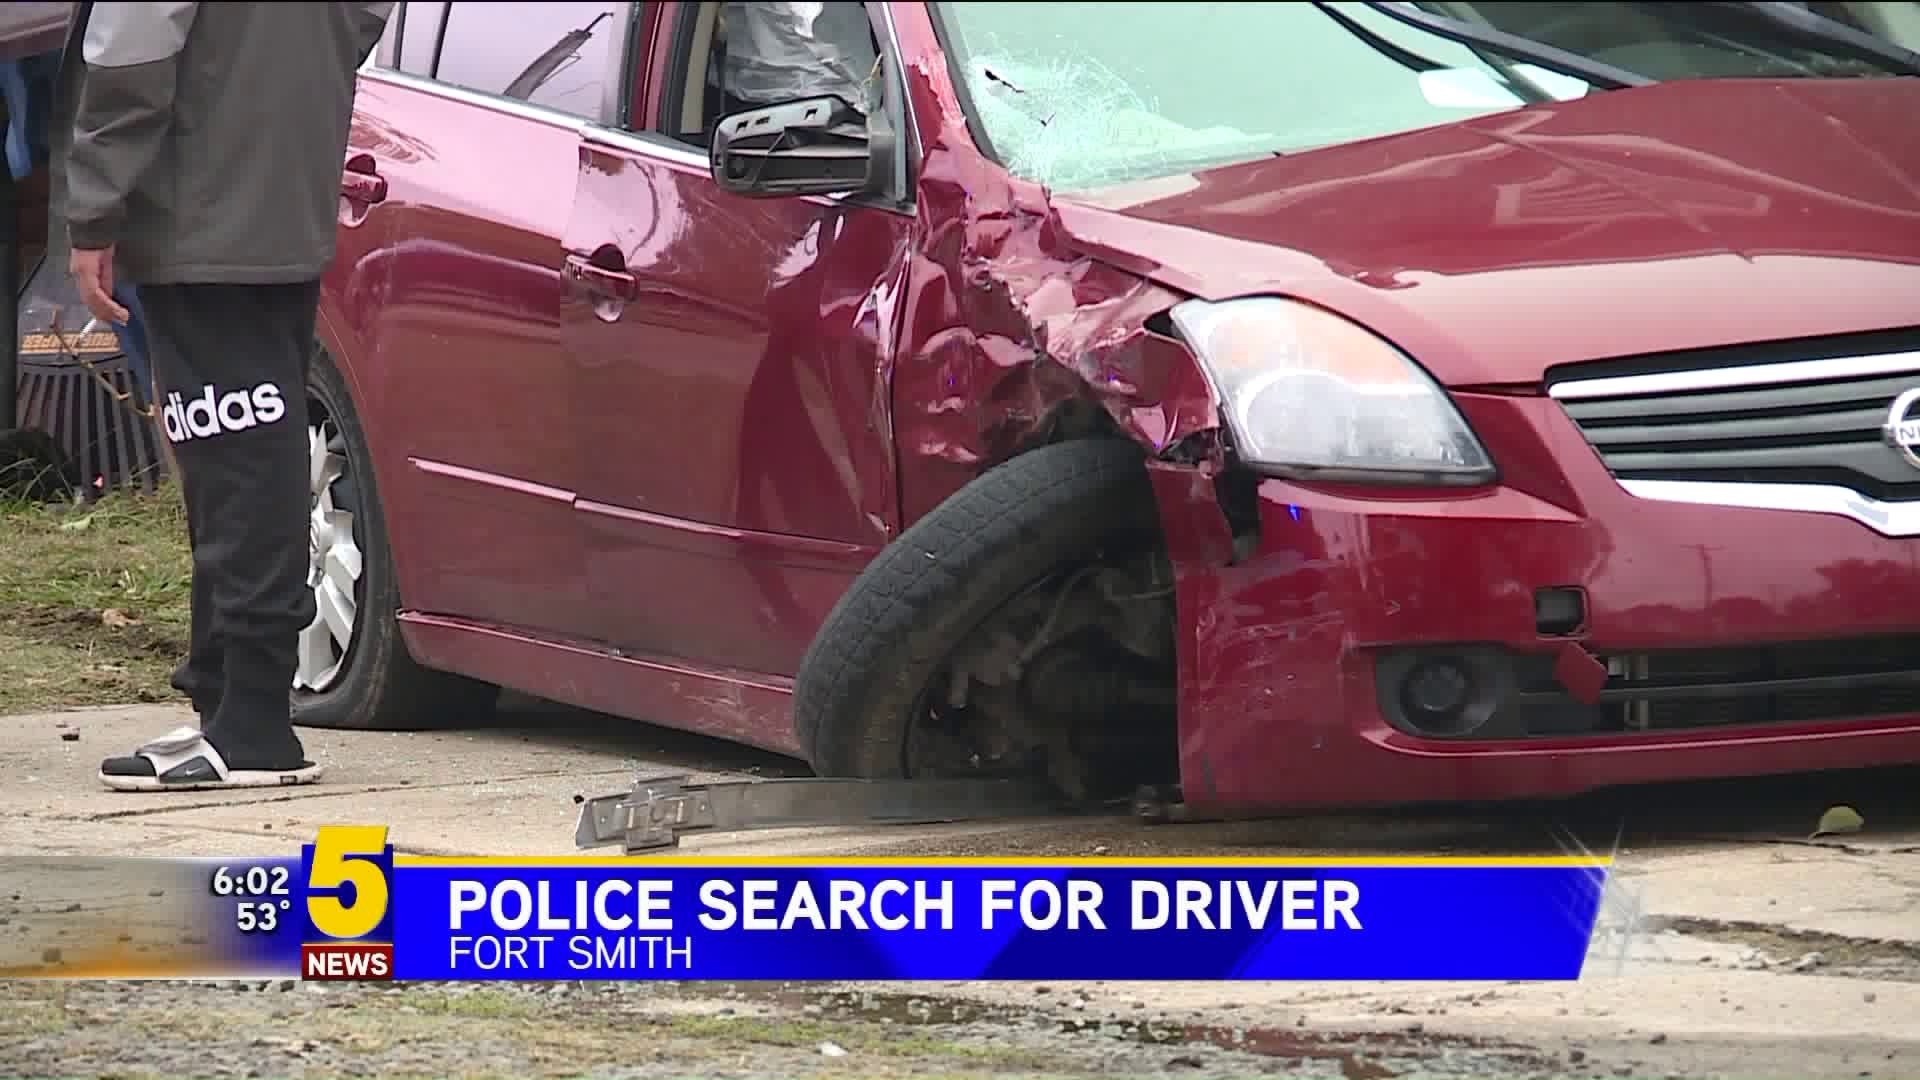 Police Search For Drive In Multi-Vehicle Crash In Fort Smith